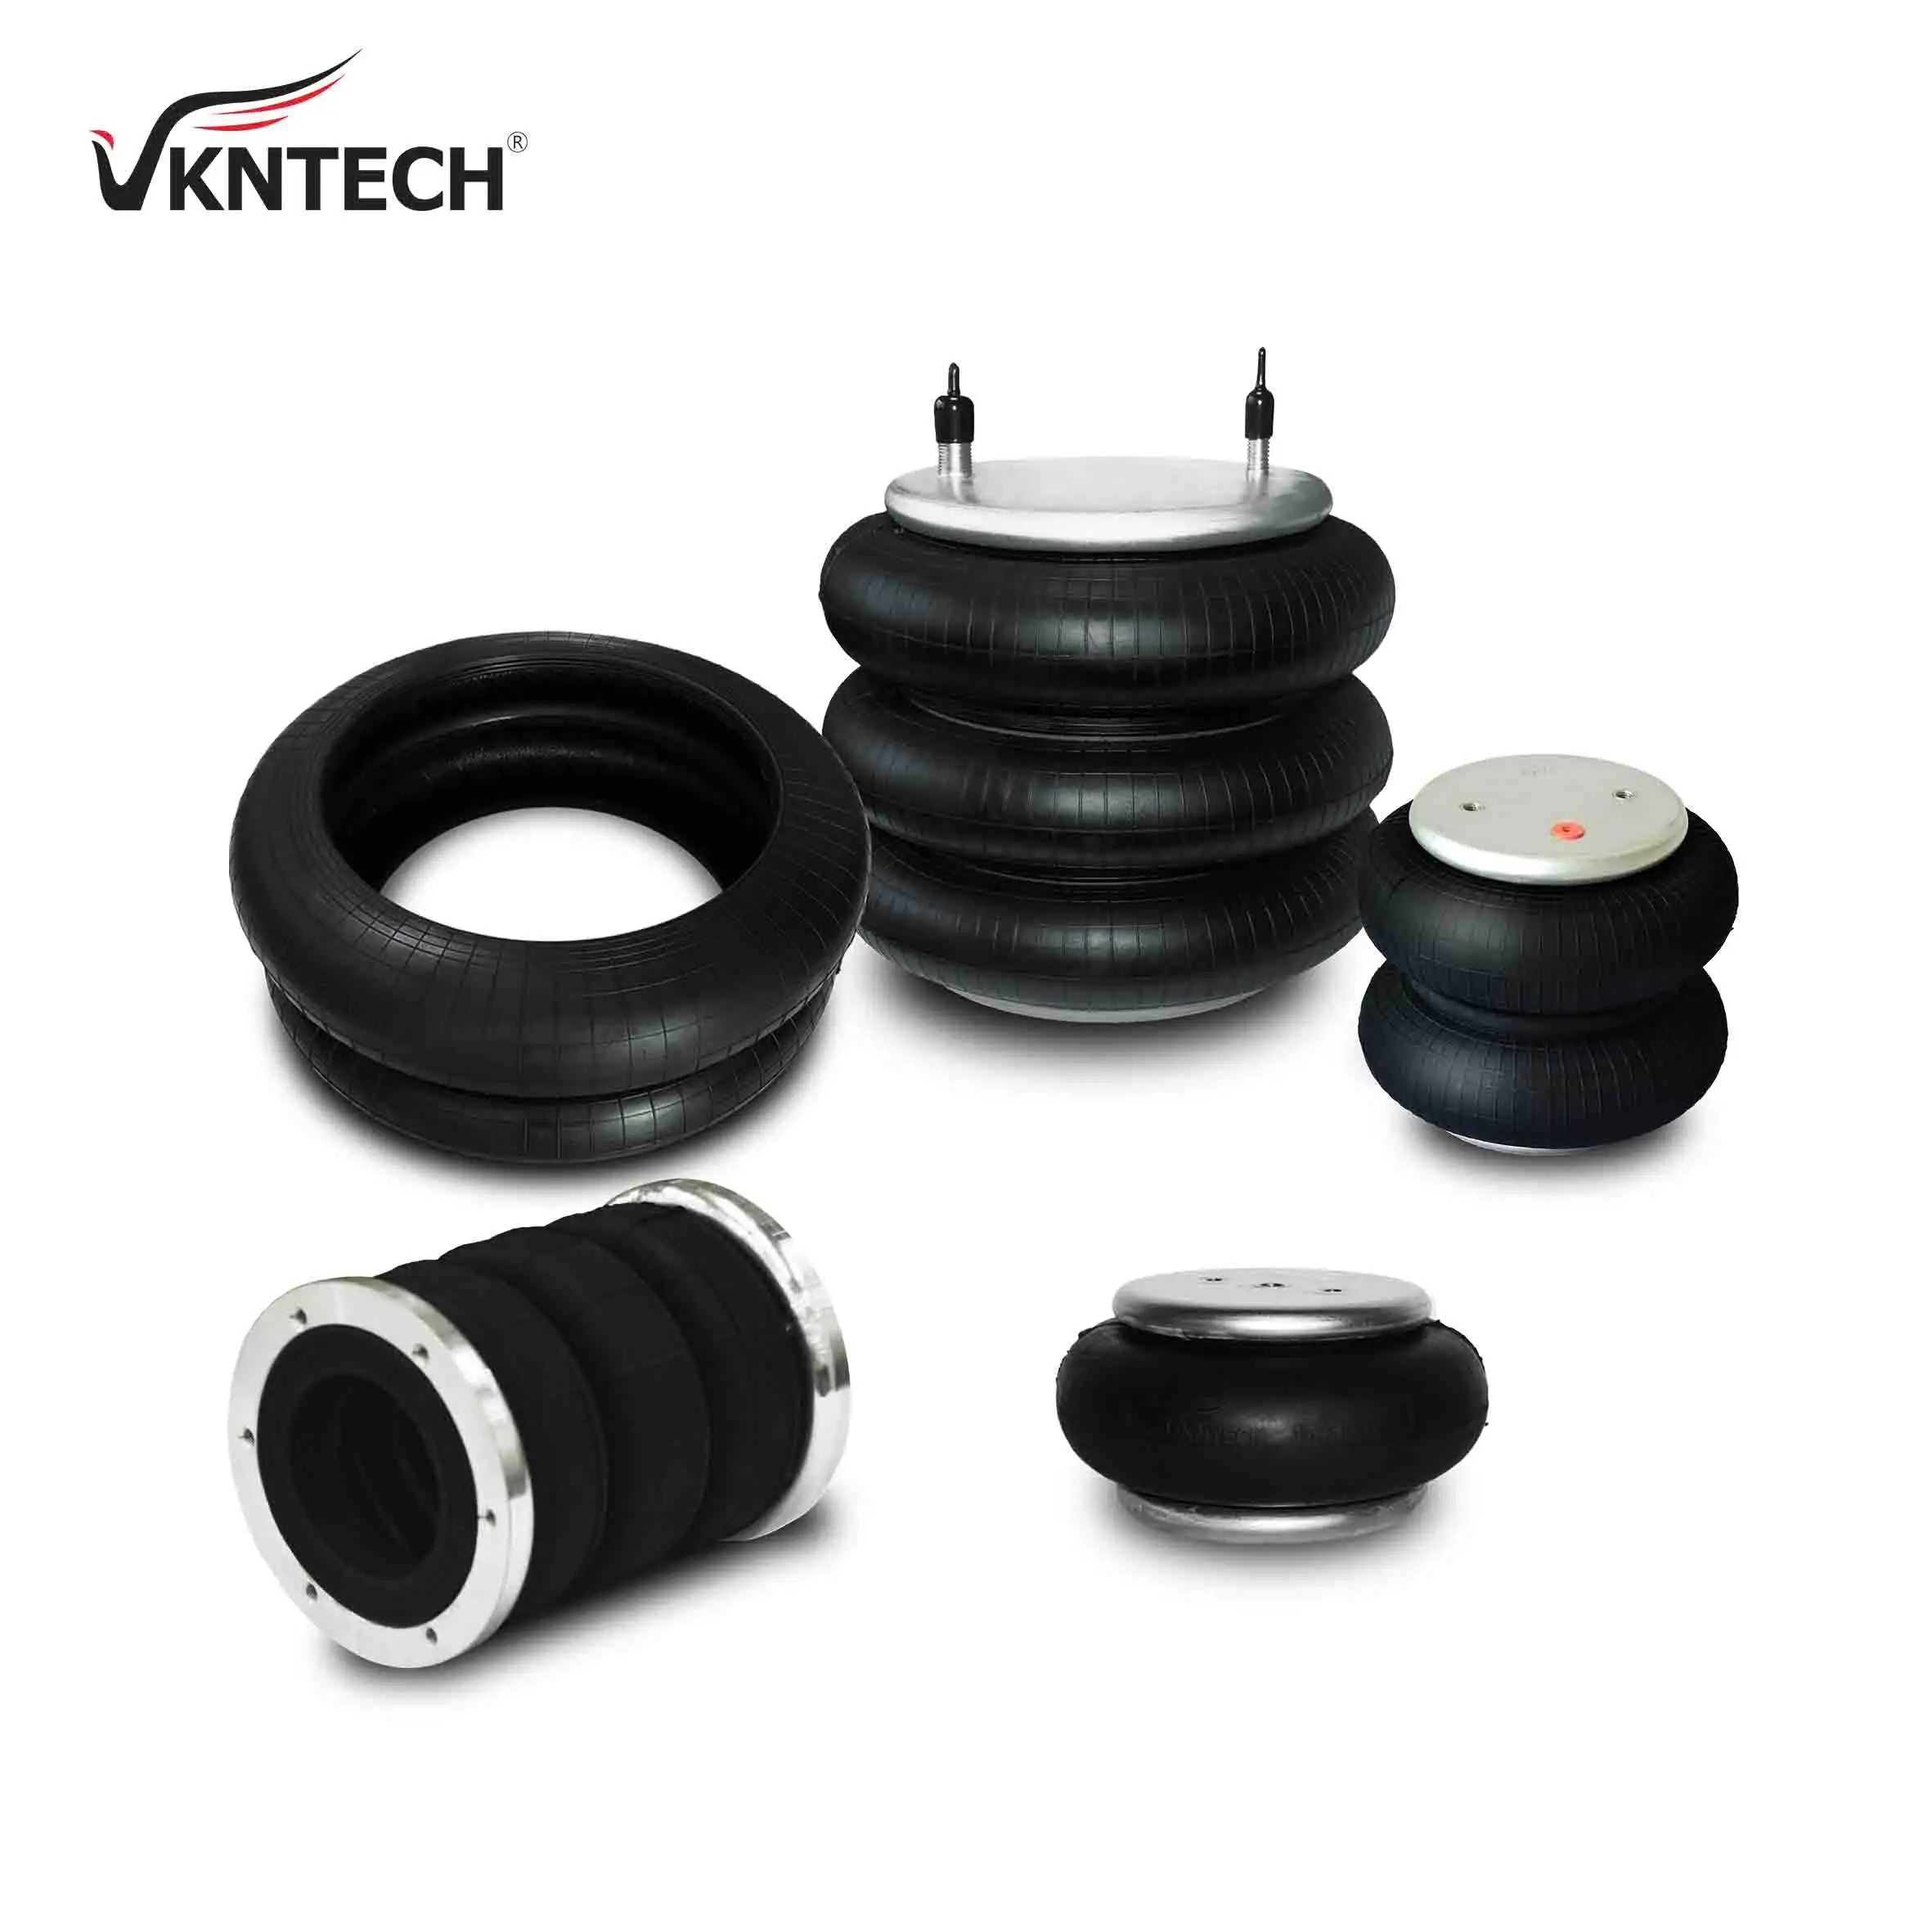 FS330-22 647 OF TAXAS for air suspension spring rubber air spring W01-358-6994 air spring for truck